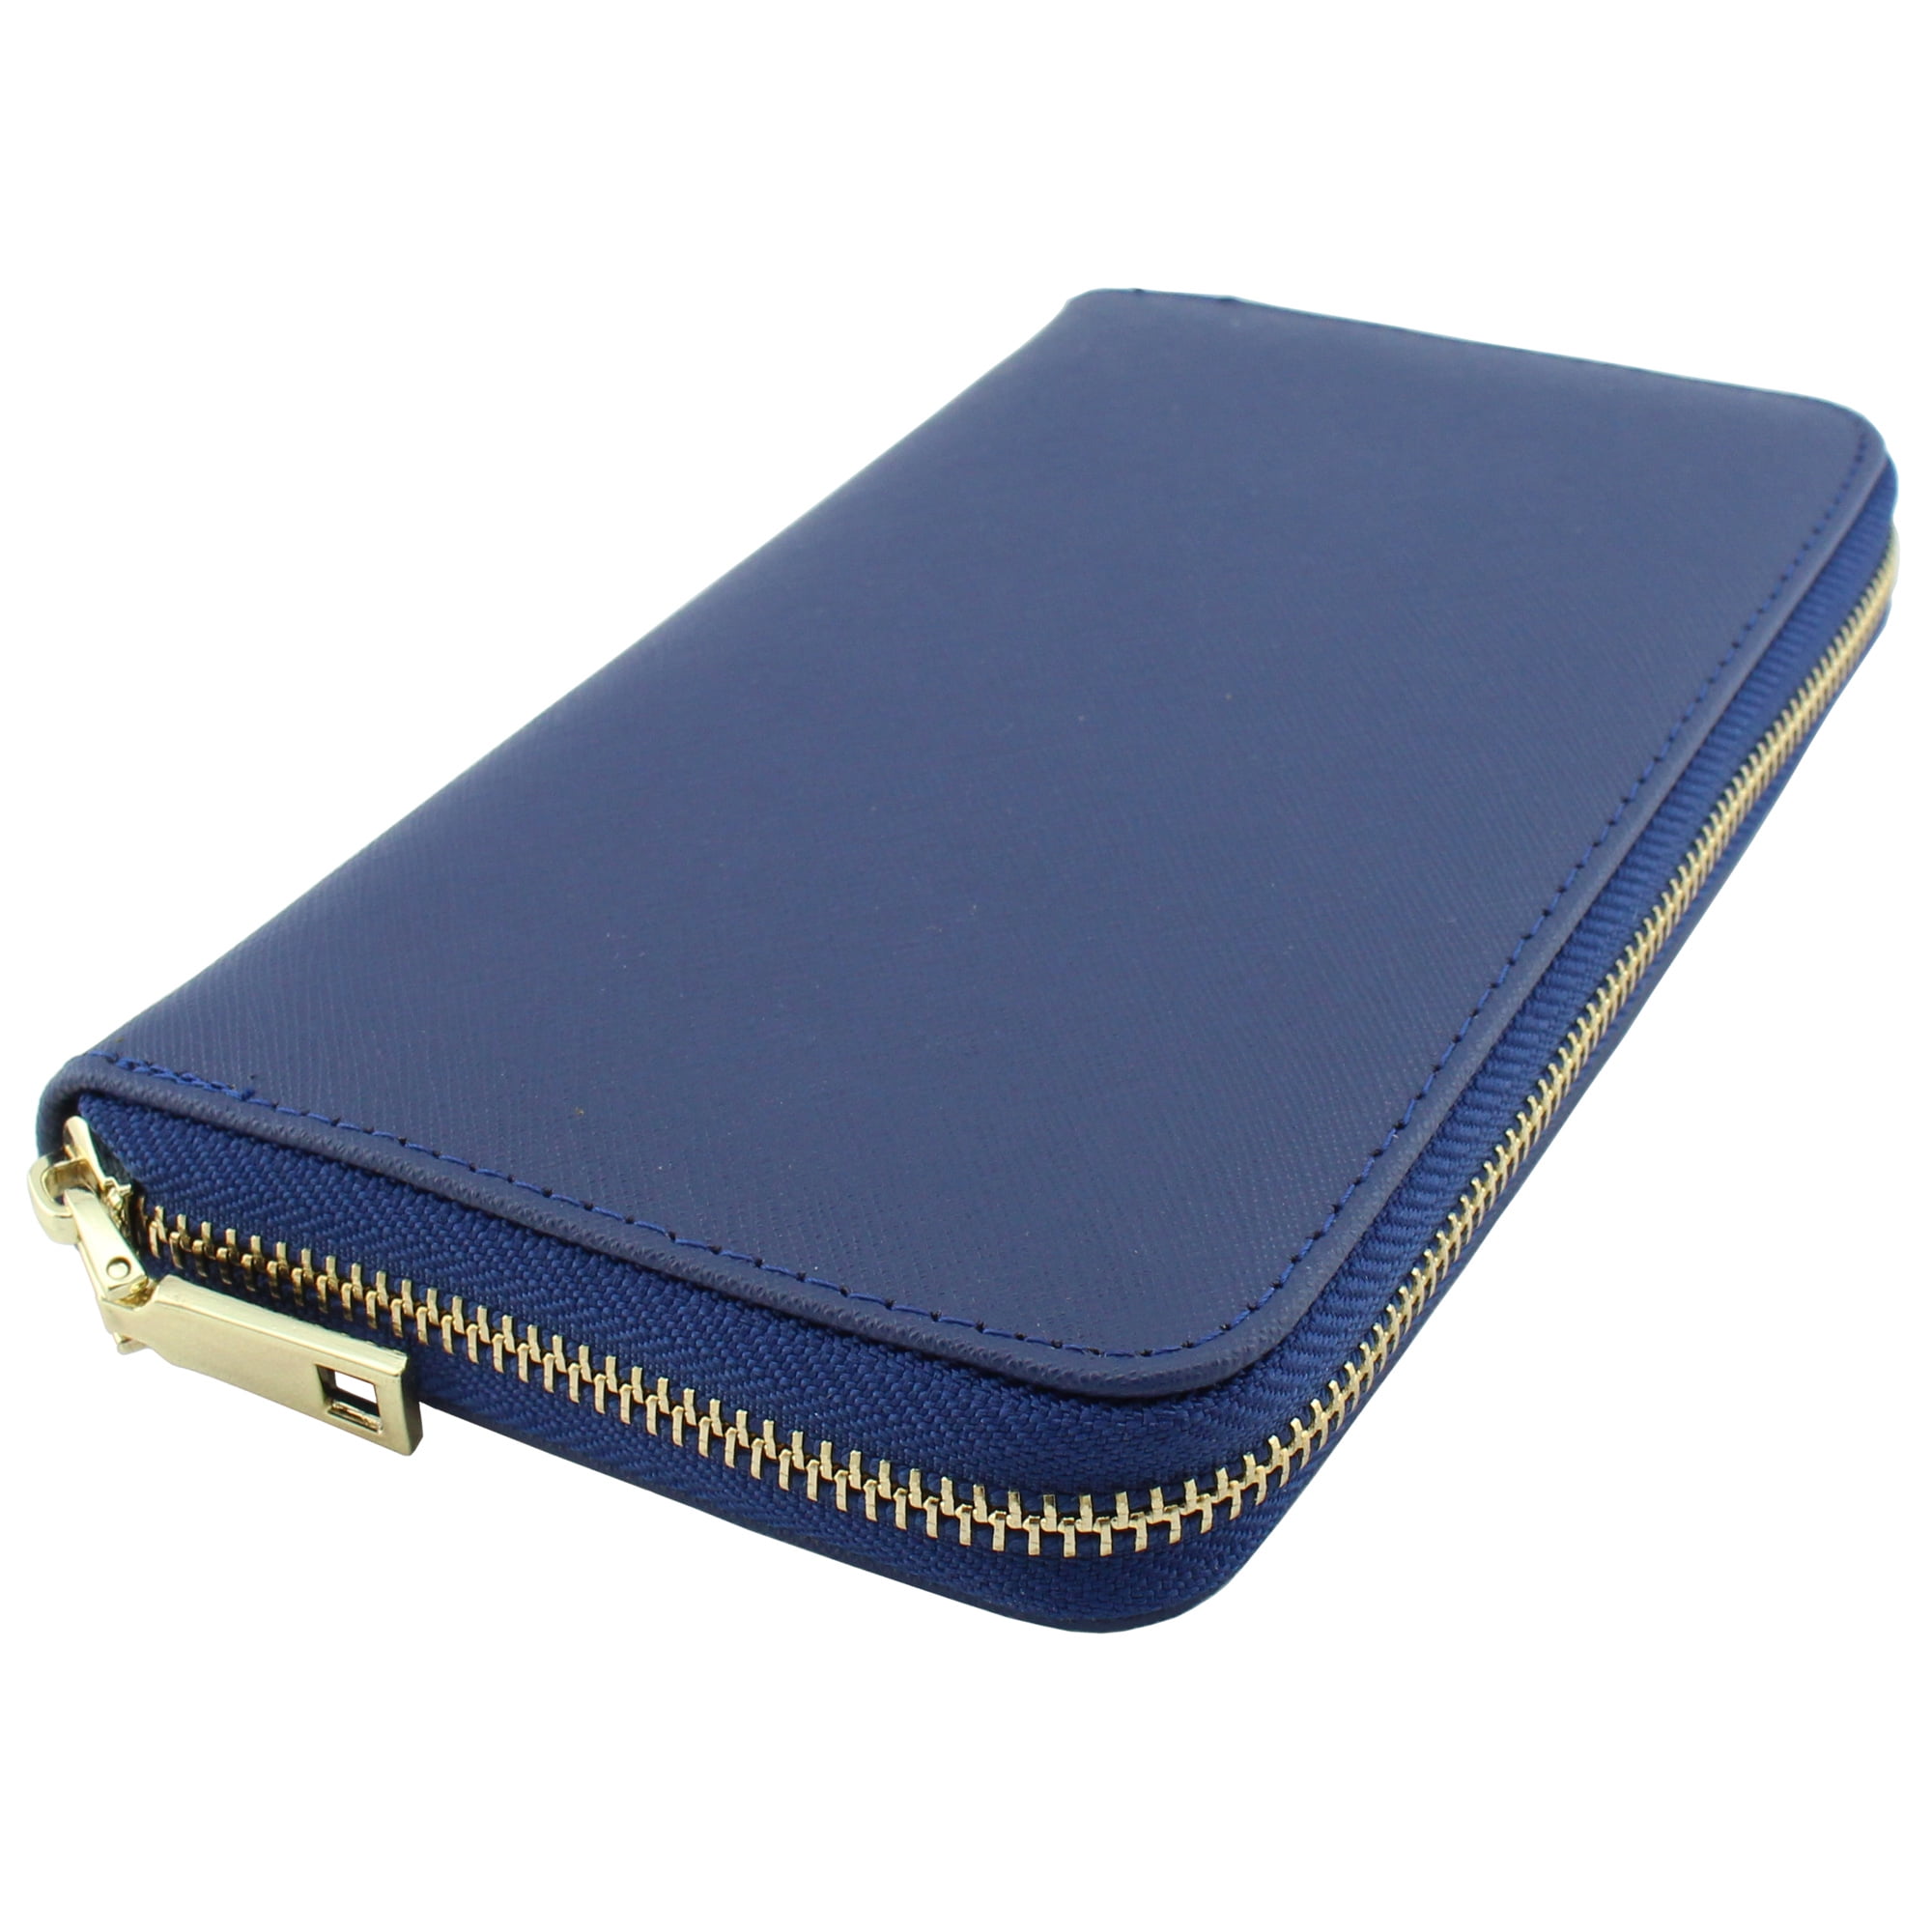 Amy&Joey genuine saffiano leather zip around wallets- NAVY color ...